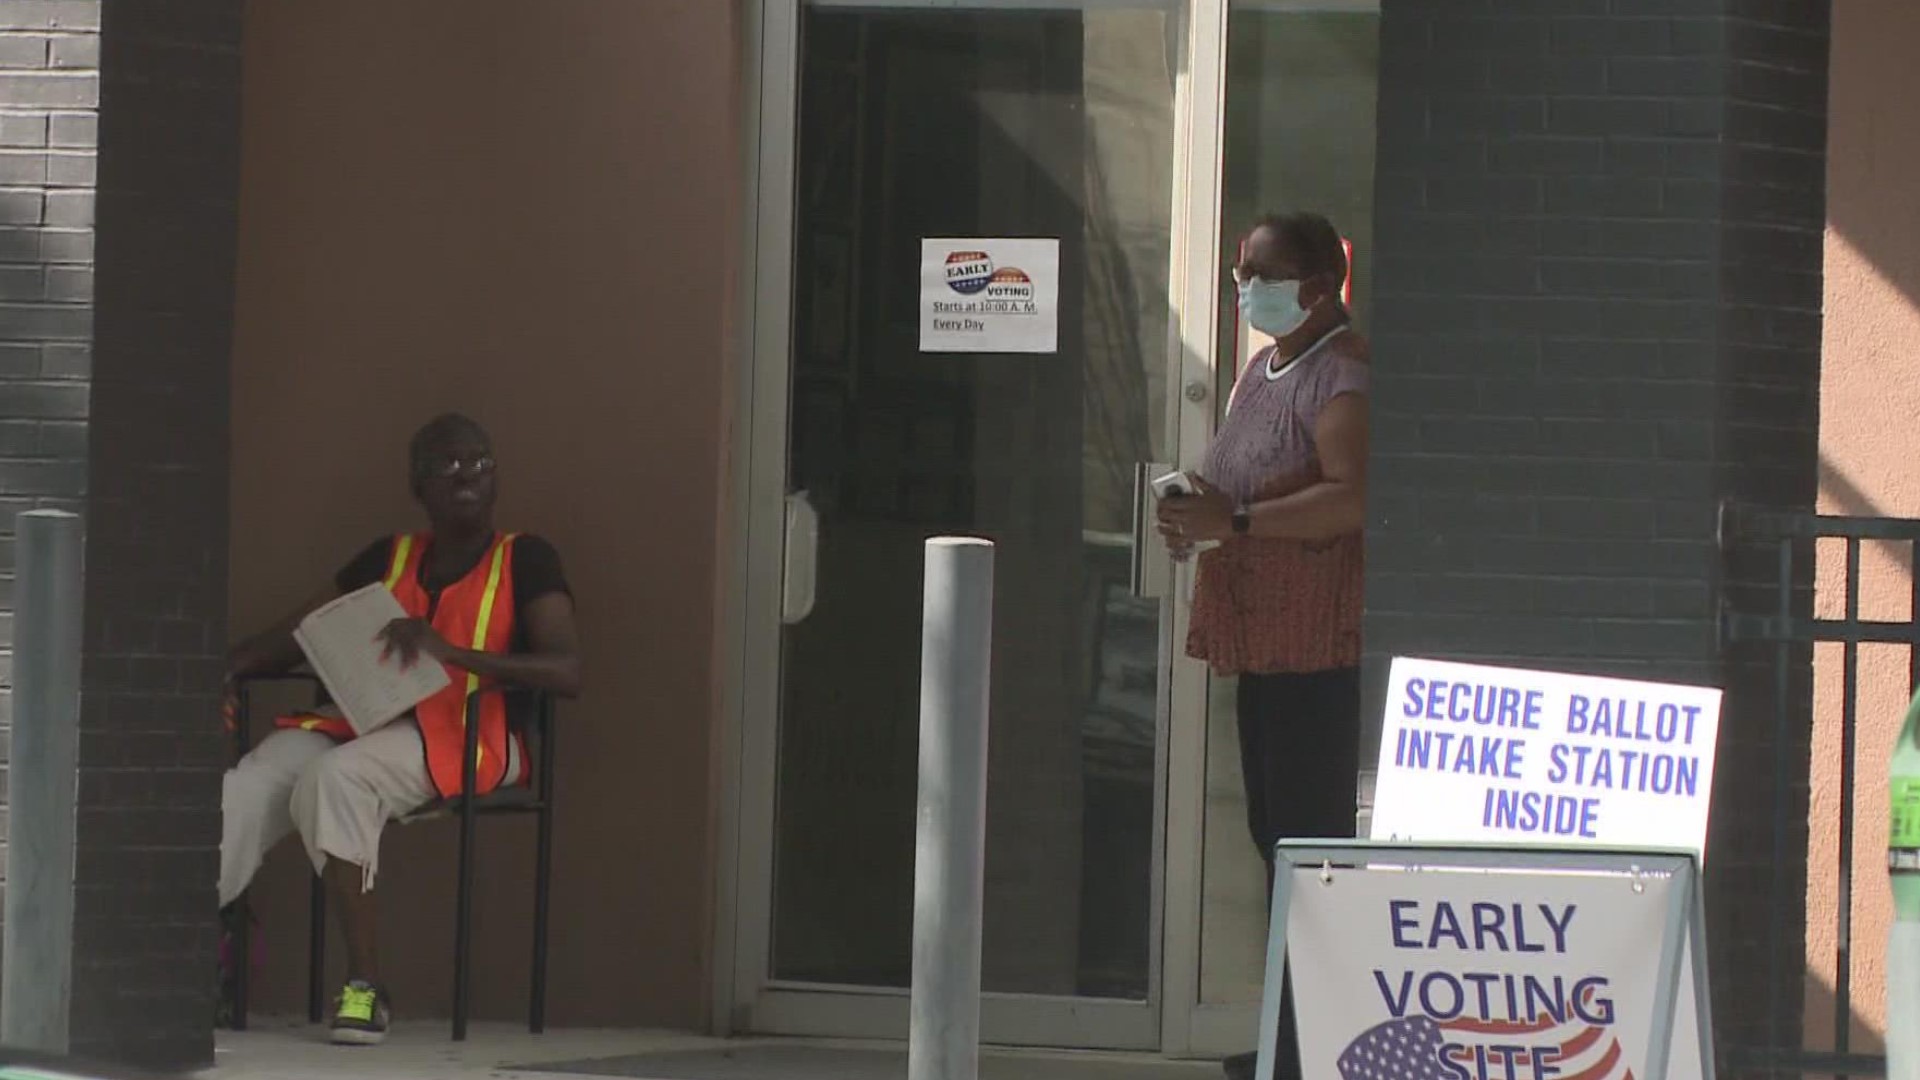 The supervisor of elections has a few tips to make sure voters can avoid as many headaches as possible on the big day.